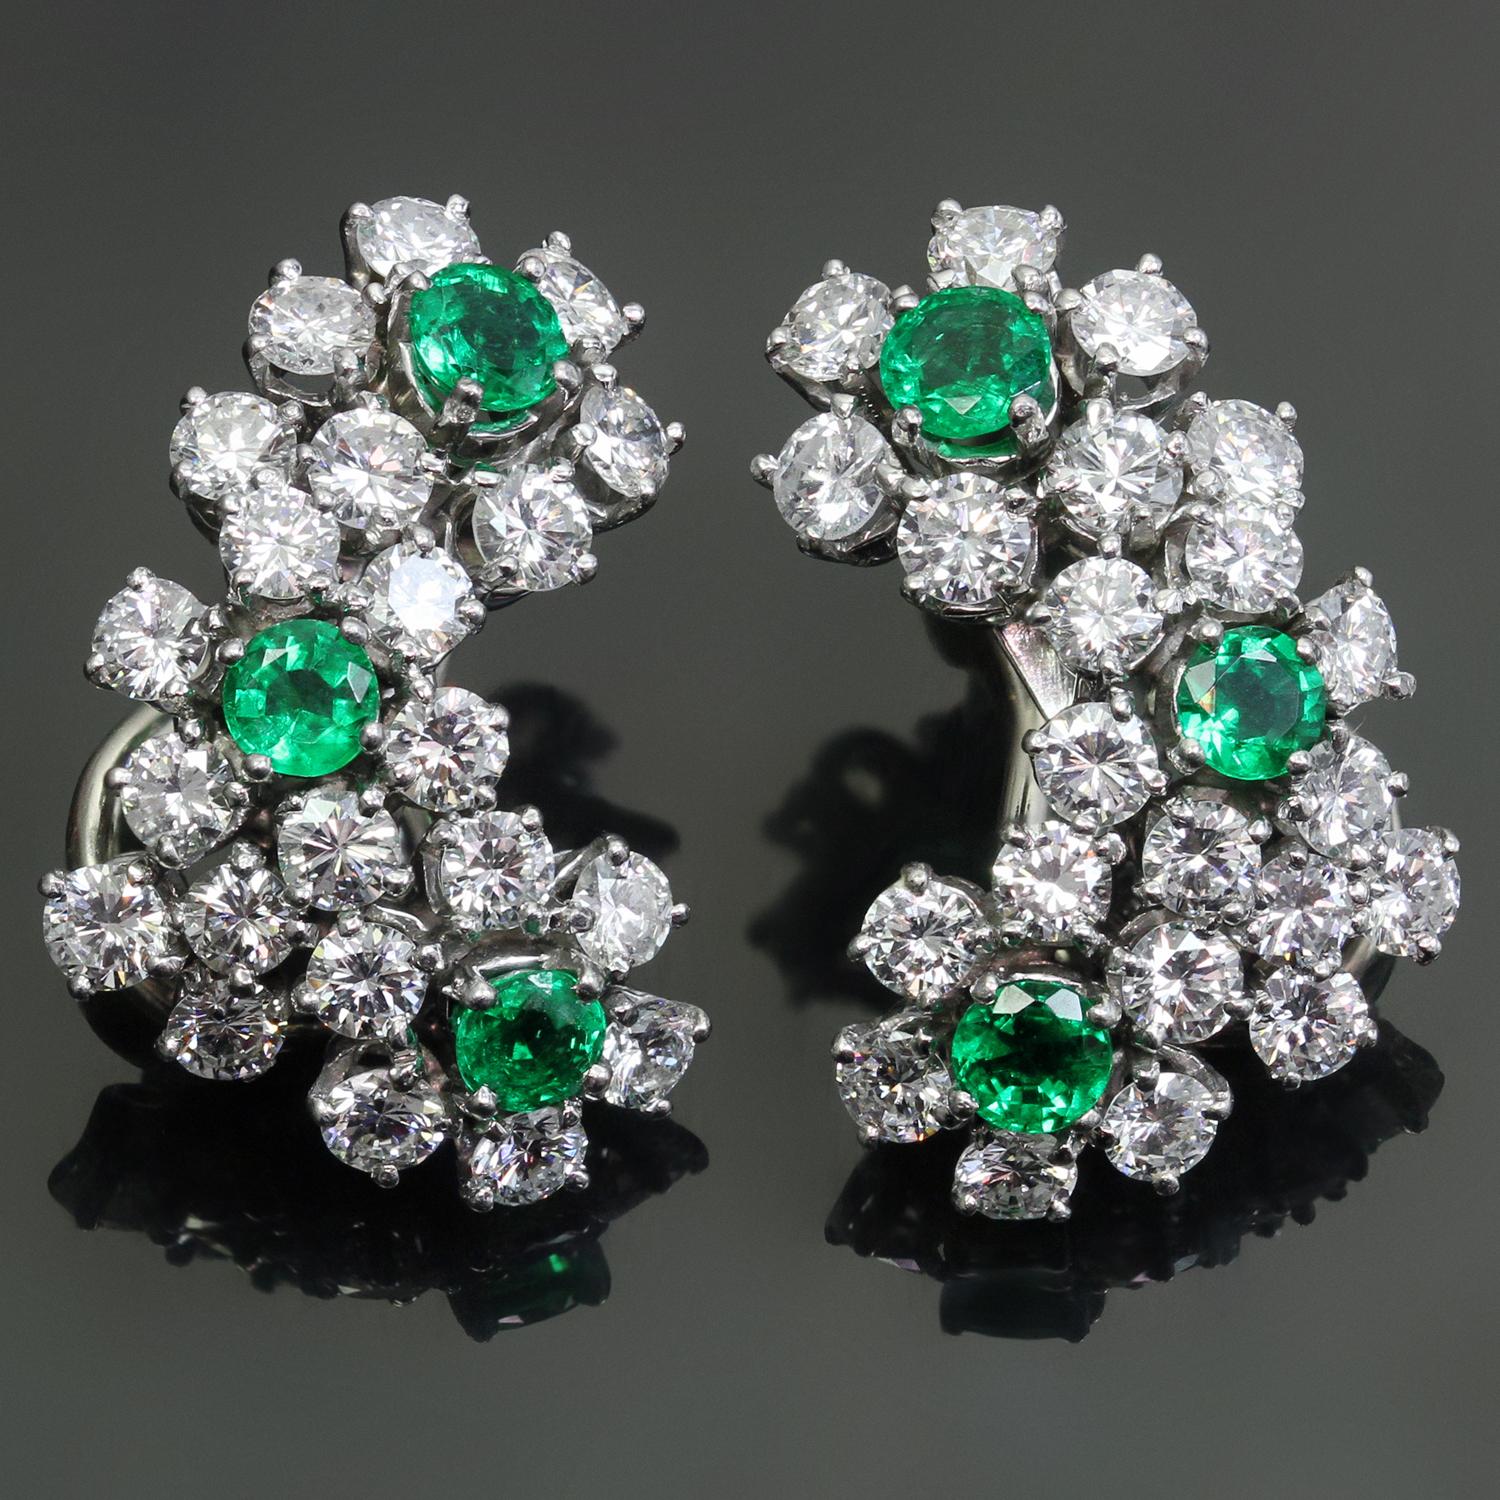 These magnificent Tiffany & Co. clip-on earrings are crafted in platinum and set 6 emeralds of an estimated 1.0 carat and 44 brilliant-cut round F-G VVS2-VS1 diamonds of an estimated 4.0 carats. Made in United States circa 1990s. Measurements: 0.59